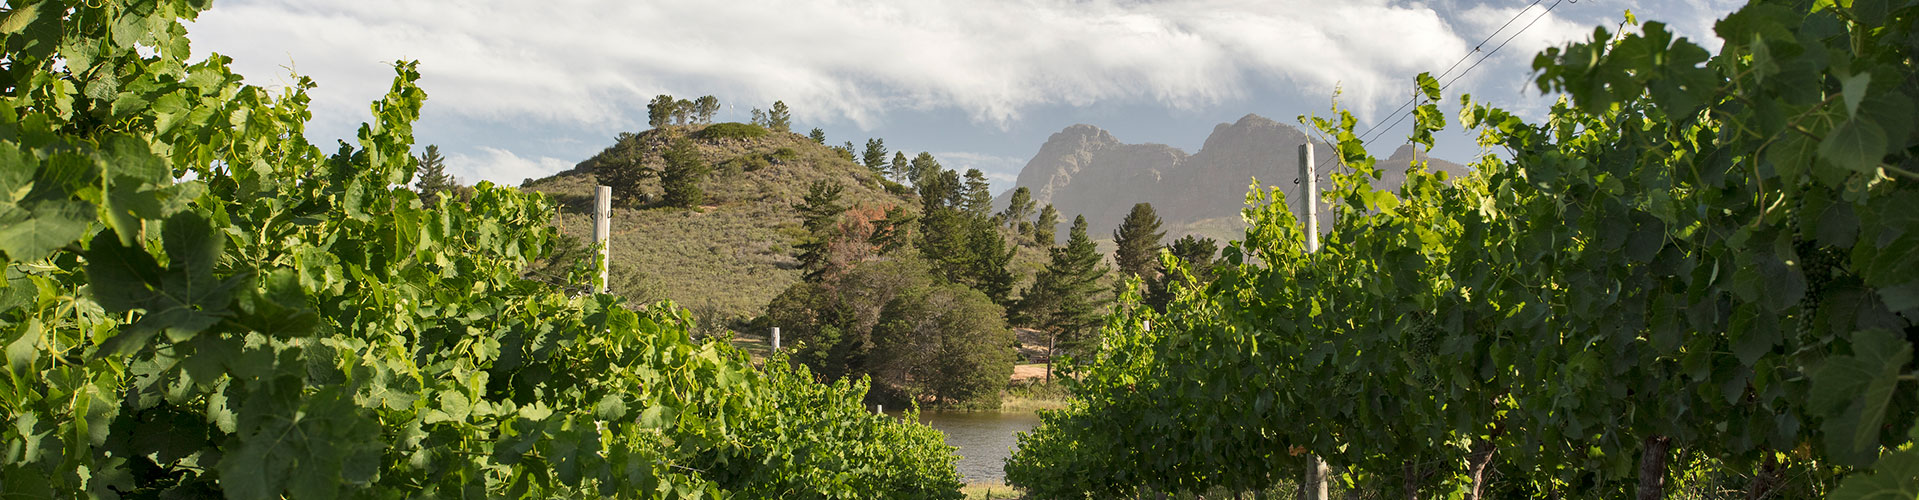 View of a dam and the Simonsberg mountain from the Backsberg vineyard in Paarl, South Africa.